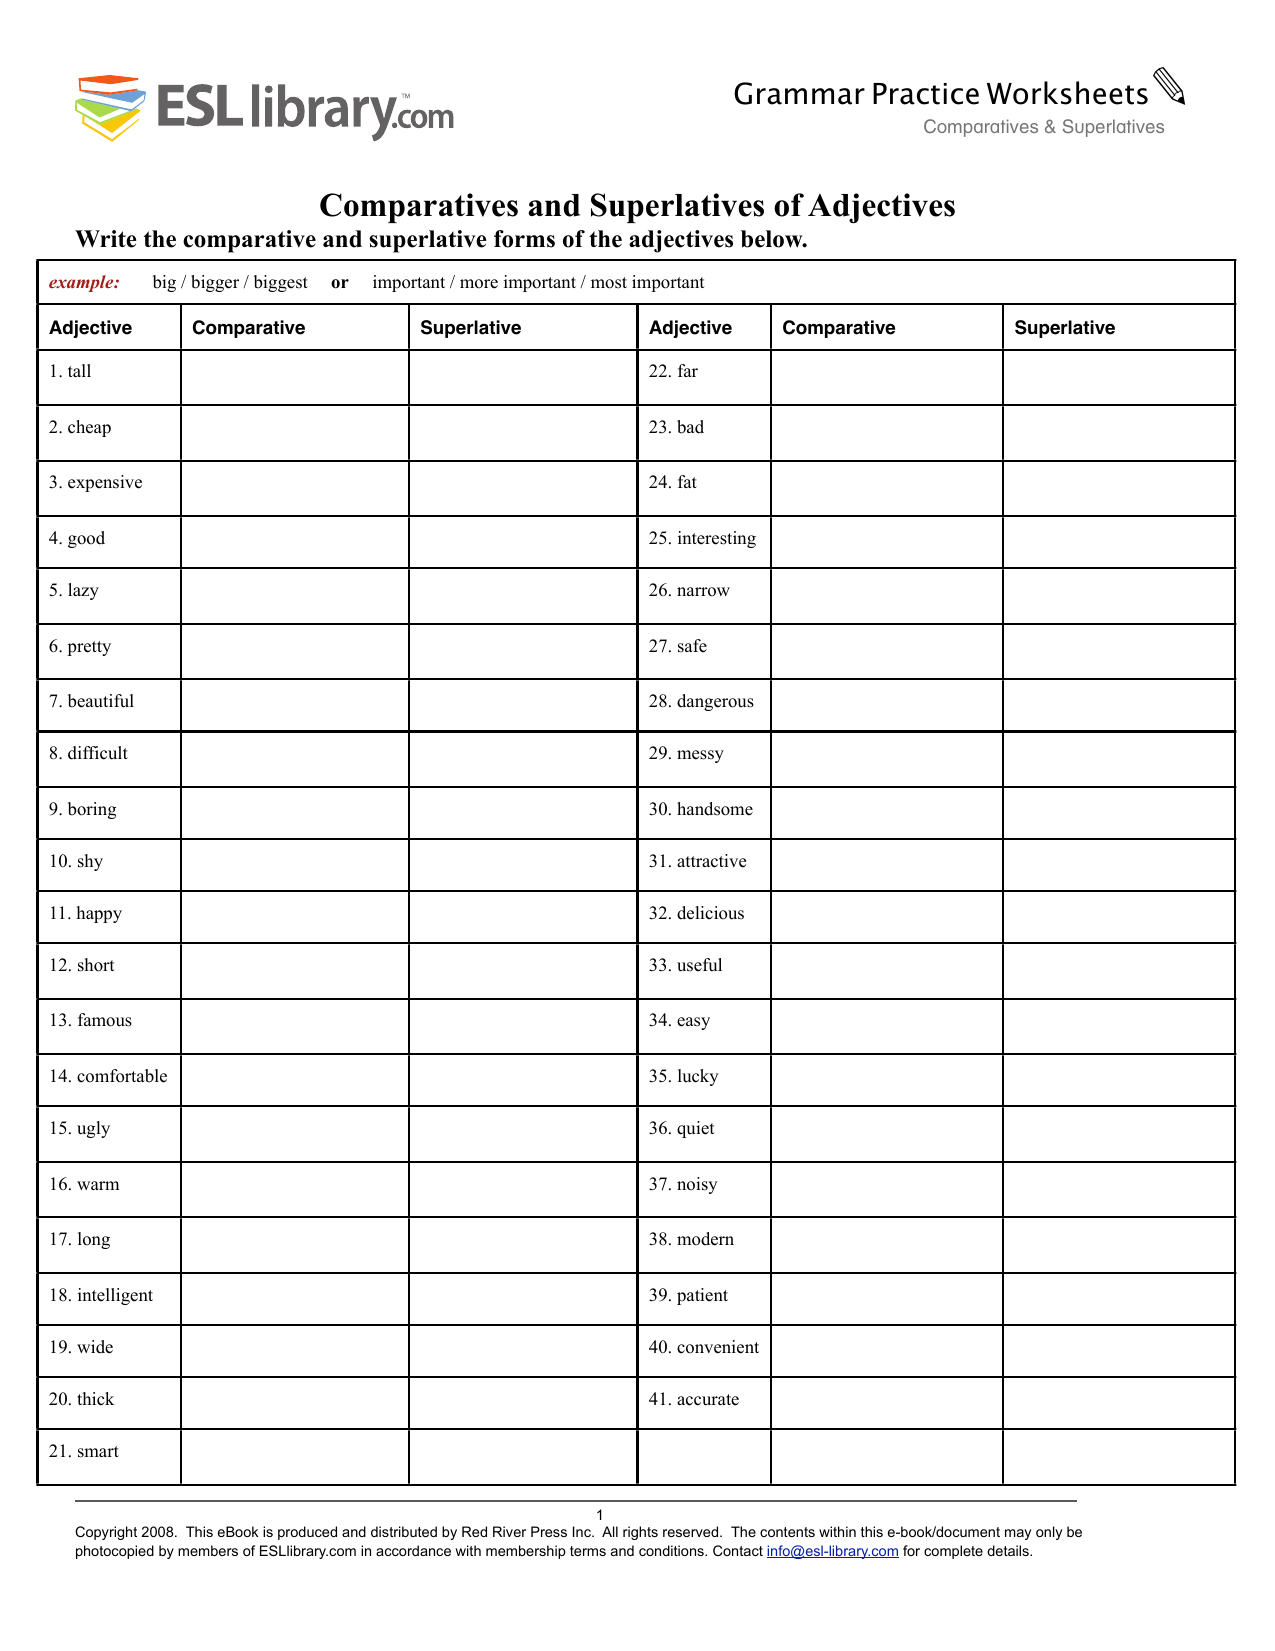 comparative-and-superlative-worksheet-free-printable-pdf-for-children-answers-and-completion-rate